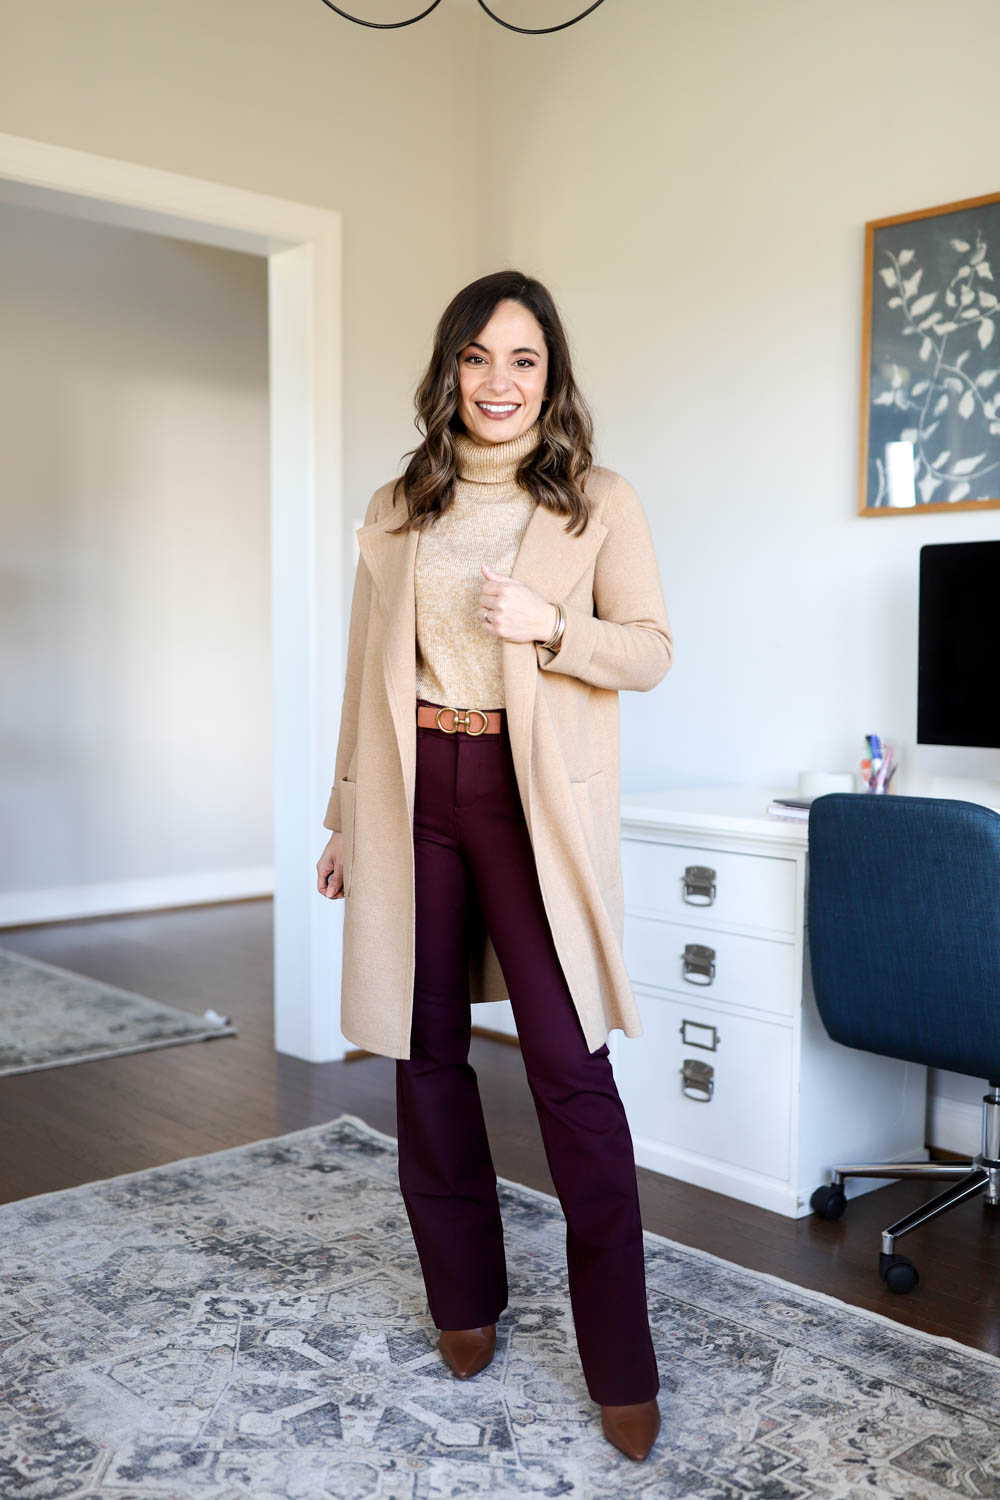 OOTD: Styling Blazer Dress With Thigh High Boots and Tights